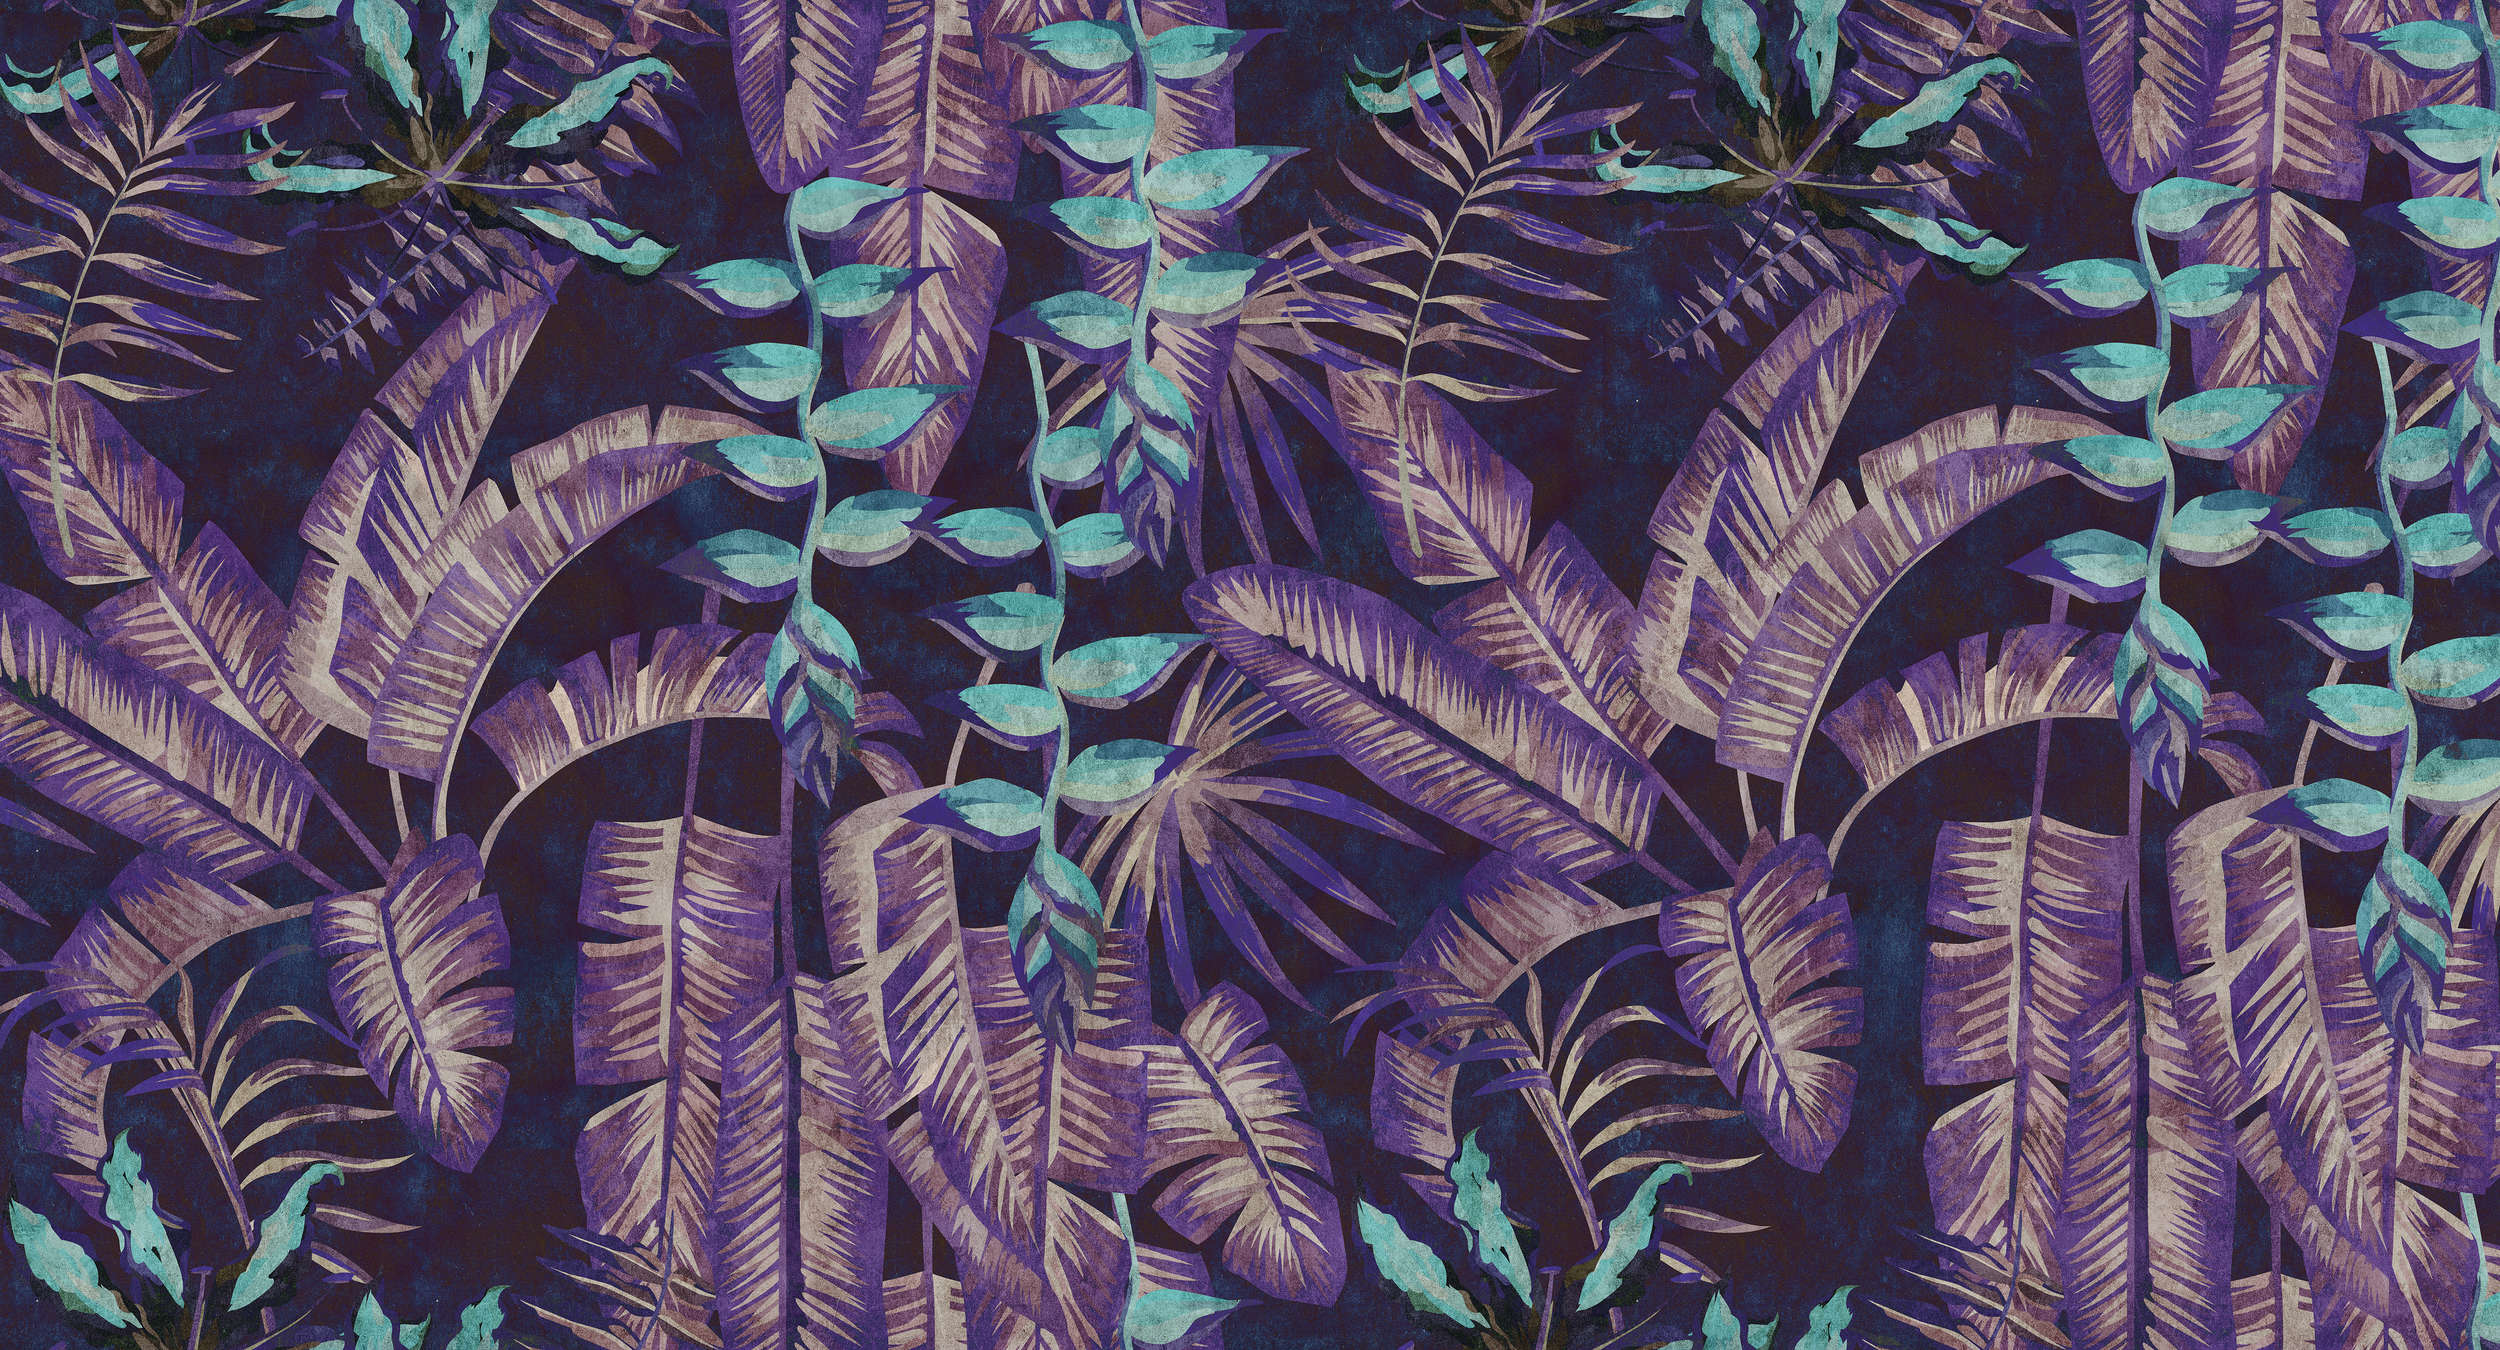             Tropicana 6 - digital print wallpaper in blotting paper structure with jungle motif - turquoise, violet | matt smooth non-woven
        